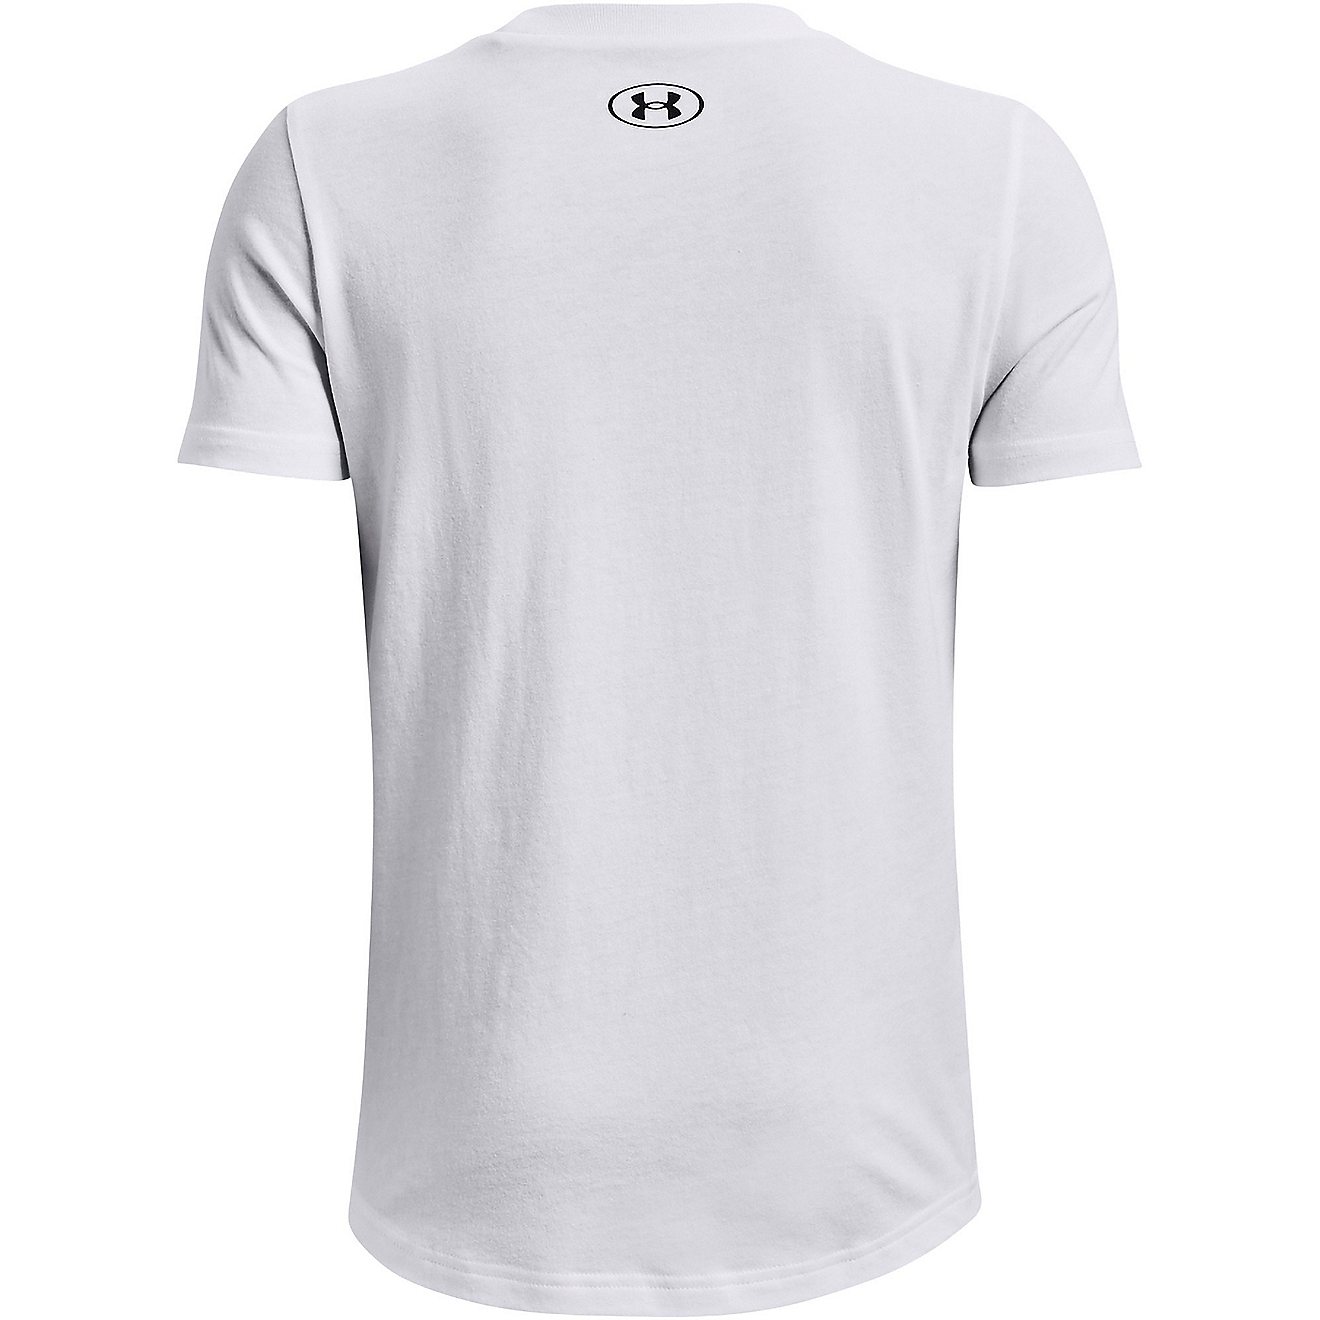 Under Armour Boys' Sportstyle Left Chest Short Sleeve T-Shirt                                                                    - view number 2